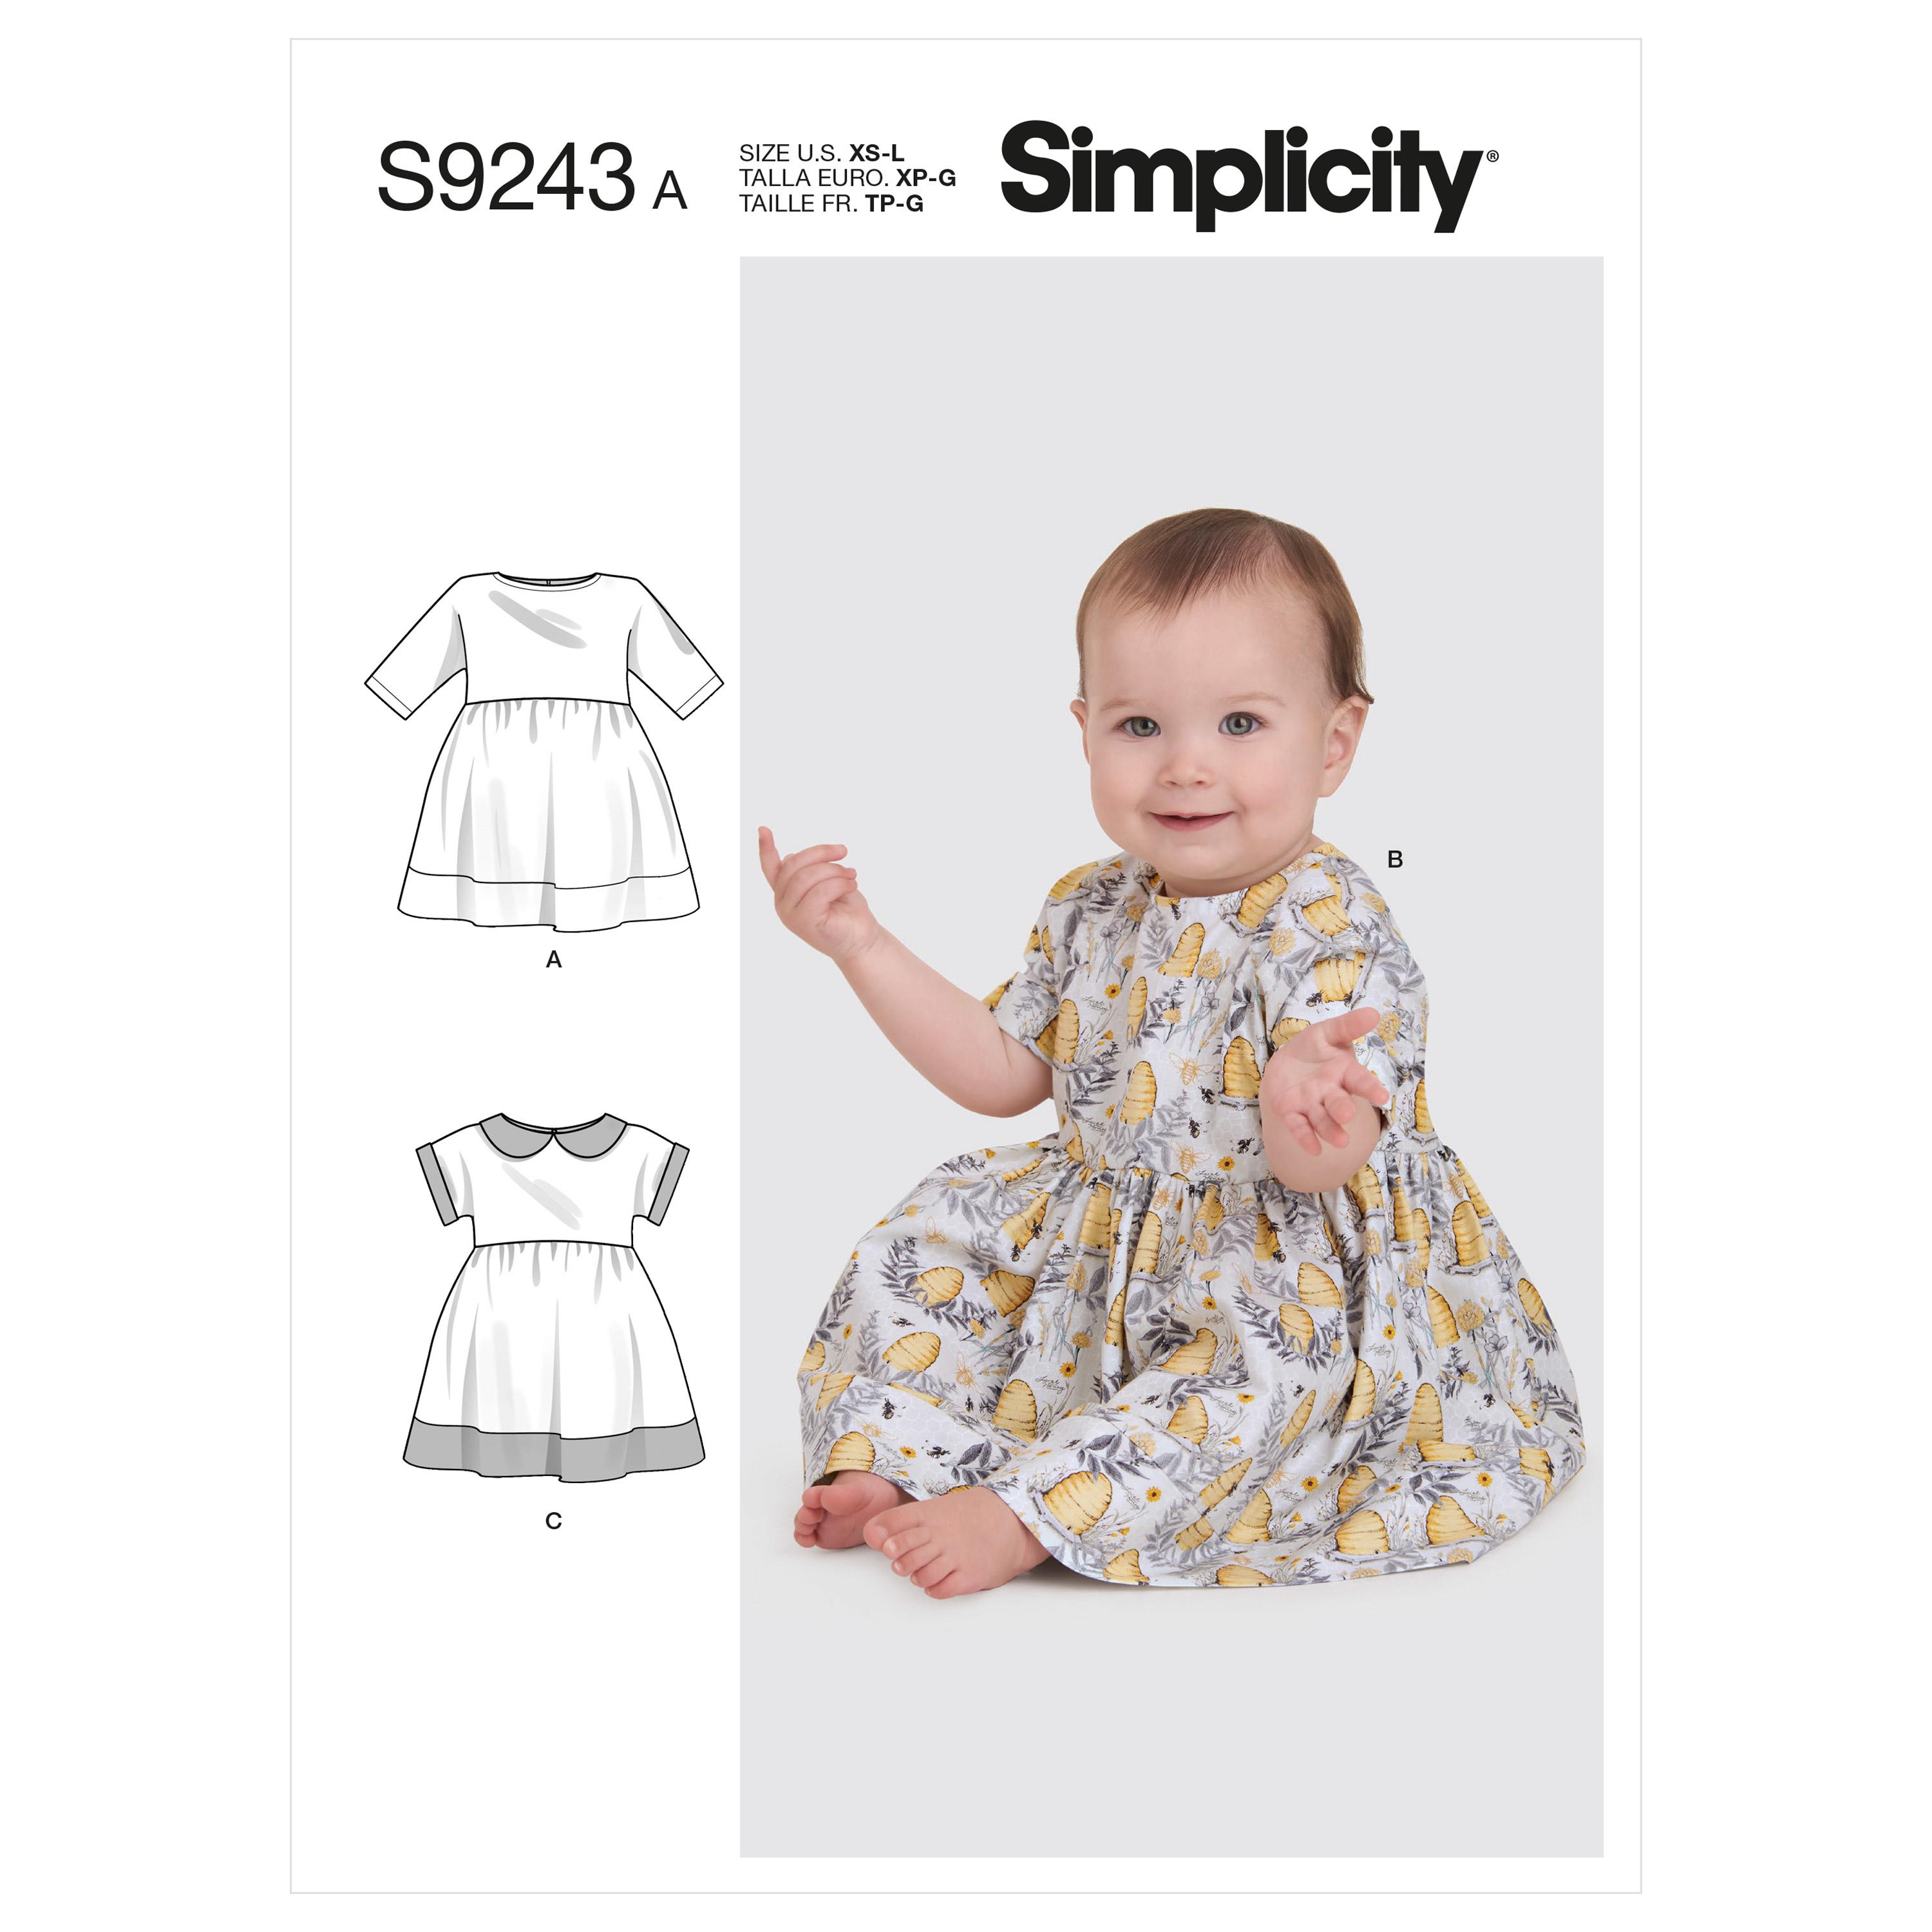 Simplicity Sewing Pattern S9243 Babies' Dresses